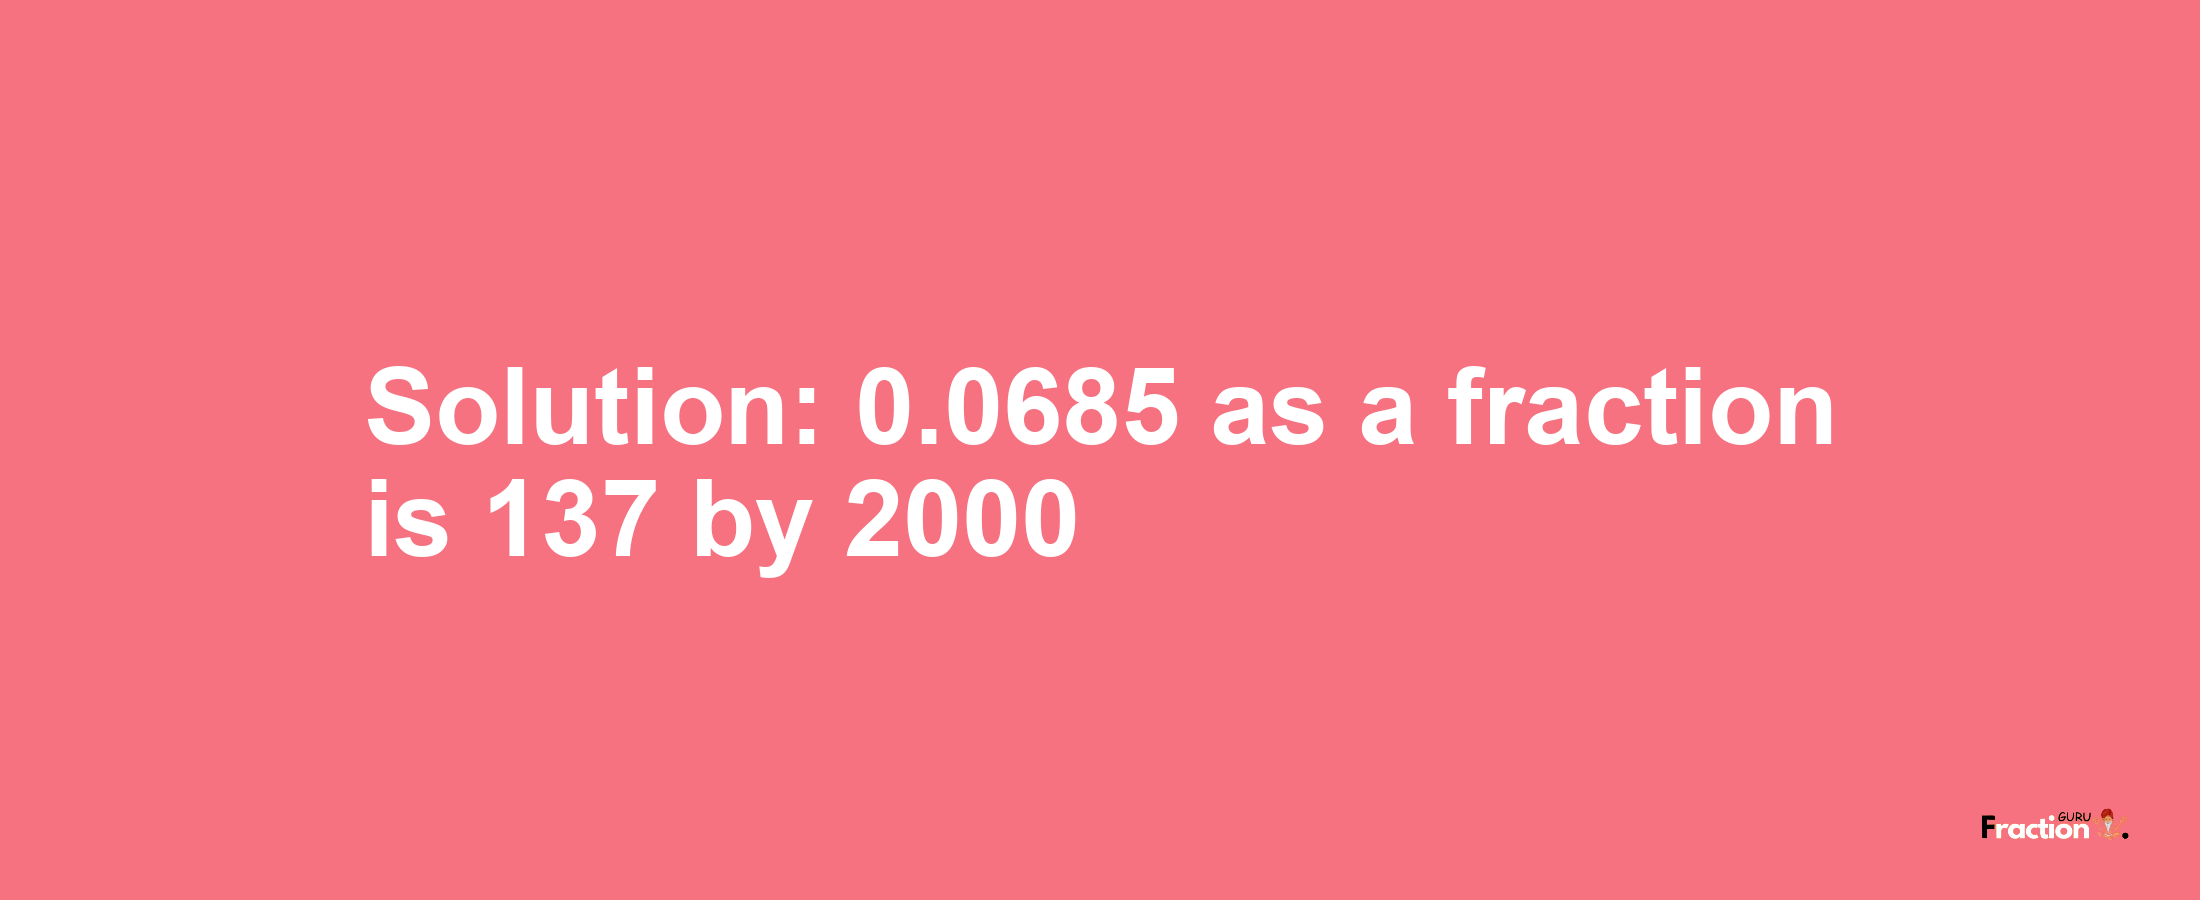 Solution:0.0685 as a fraction is 137/2000